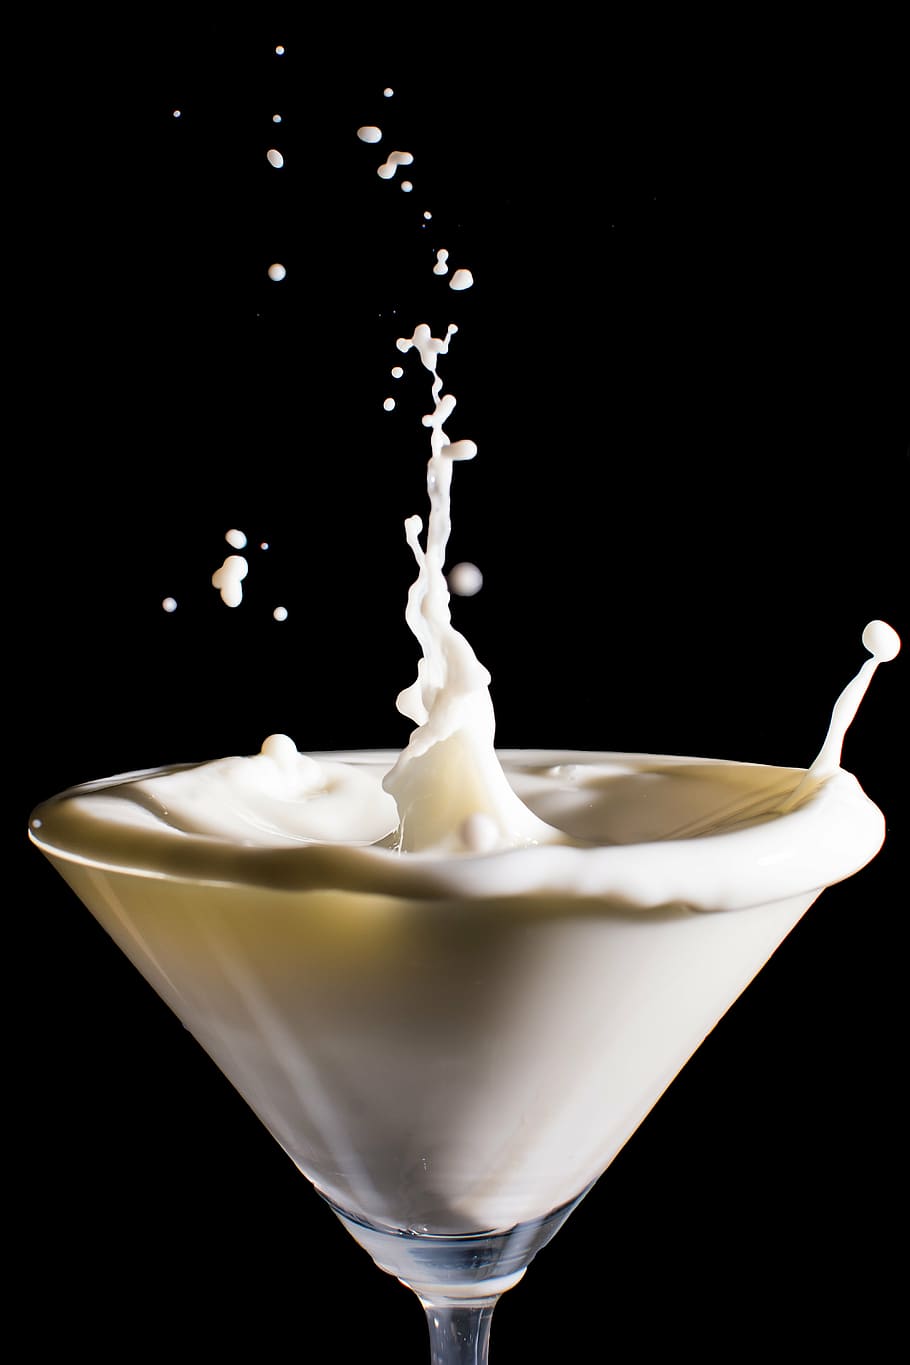 milk, the moment, a snapshot, flash, food and drink, drink, refreshment, studio shot, black background, food